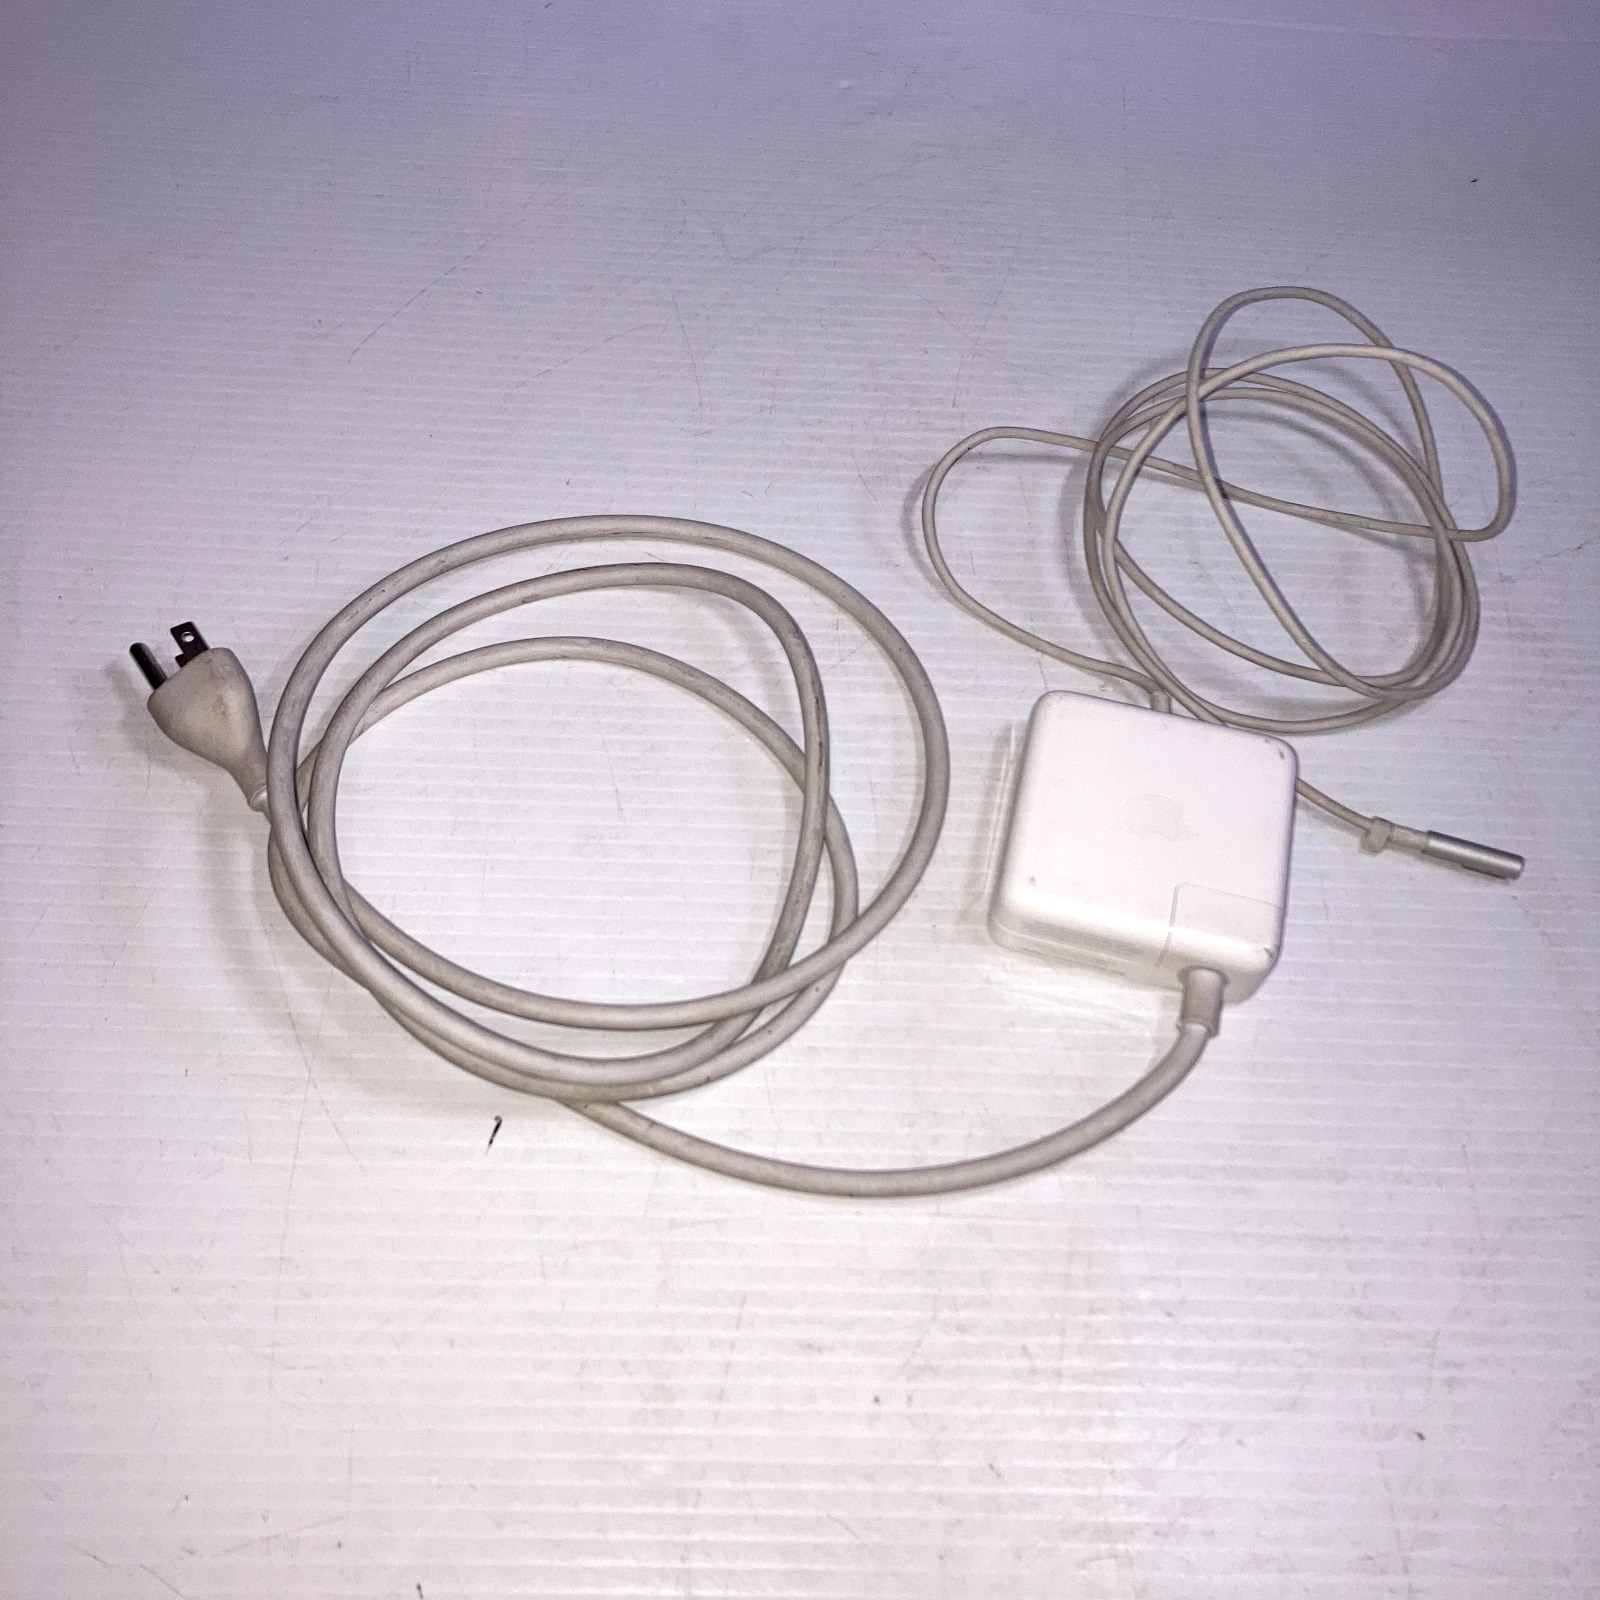 Apple 60W L-Tip MagSafe AC Power Adapter Charger for MACBOOK PRO A1344 OEM Used